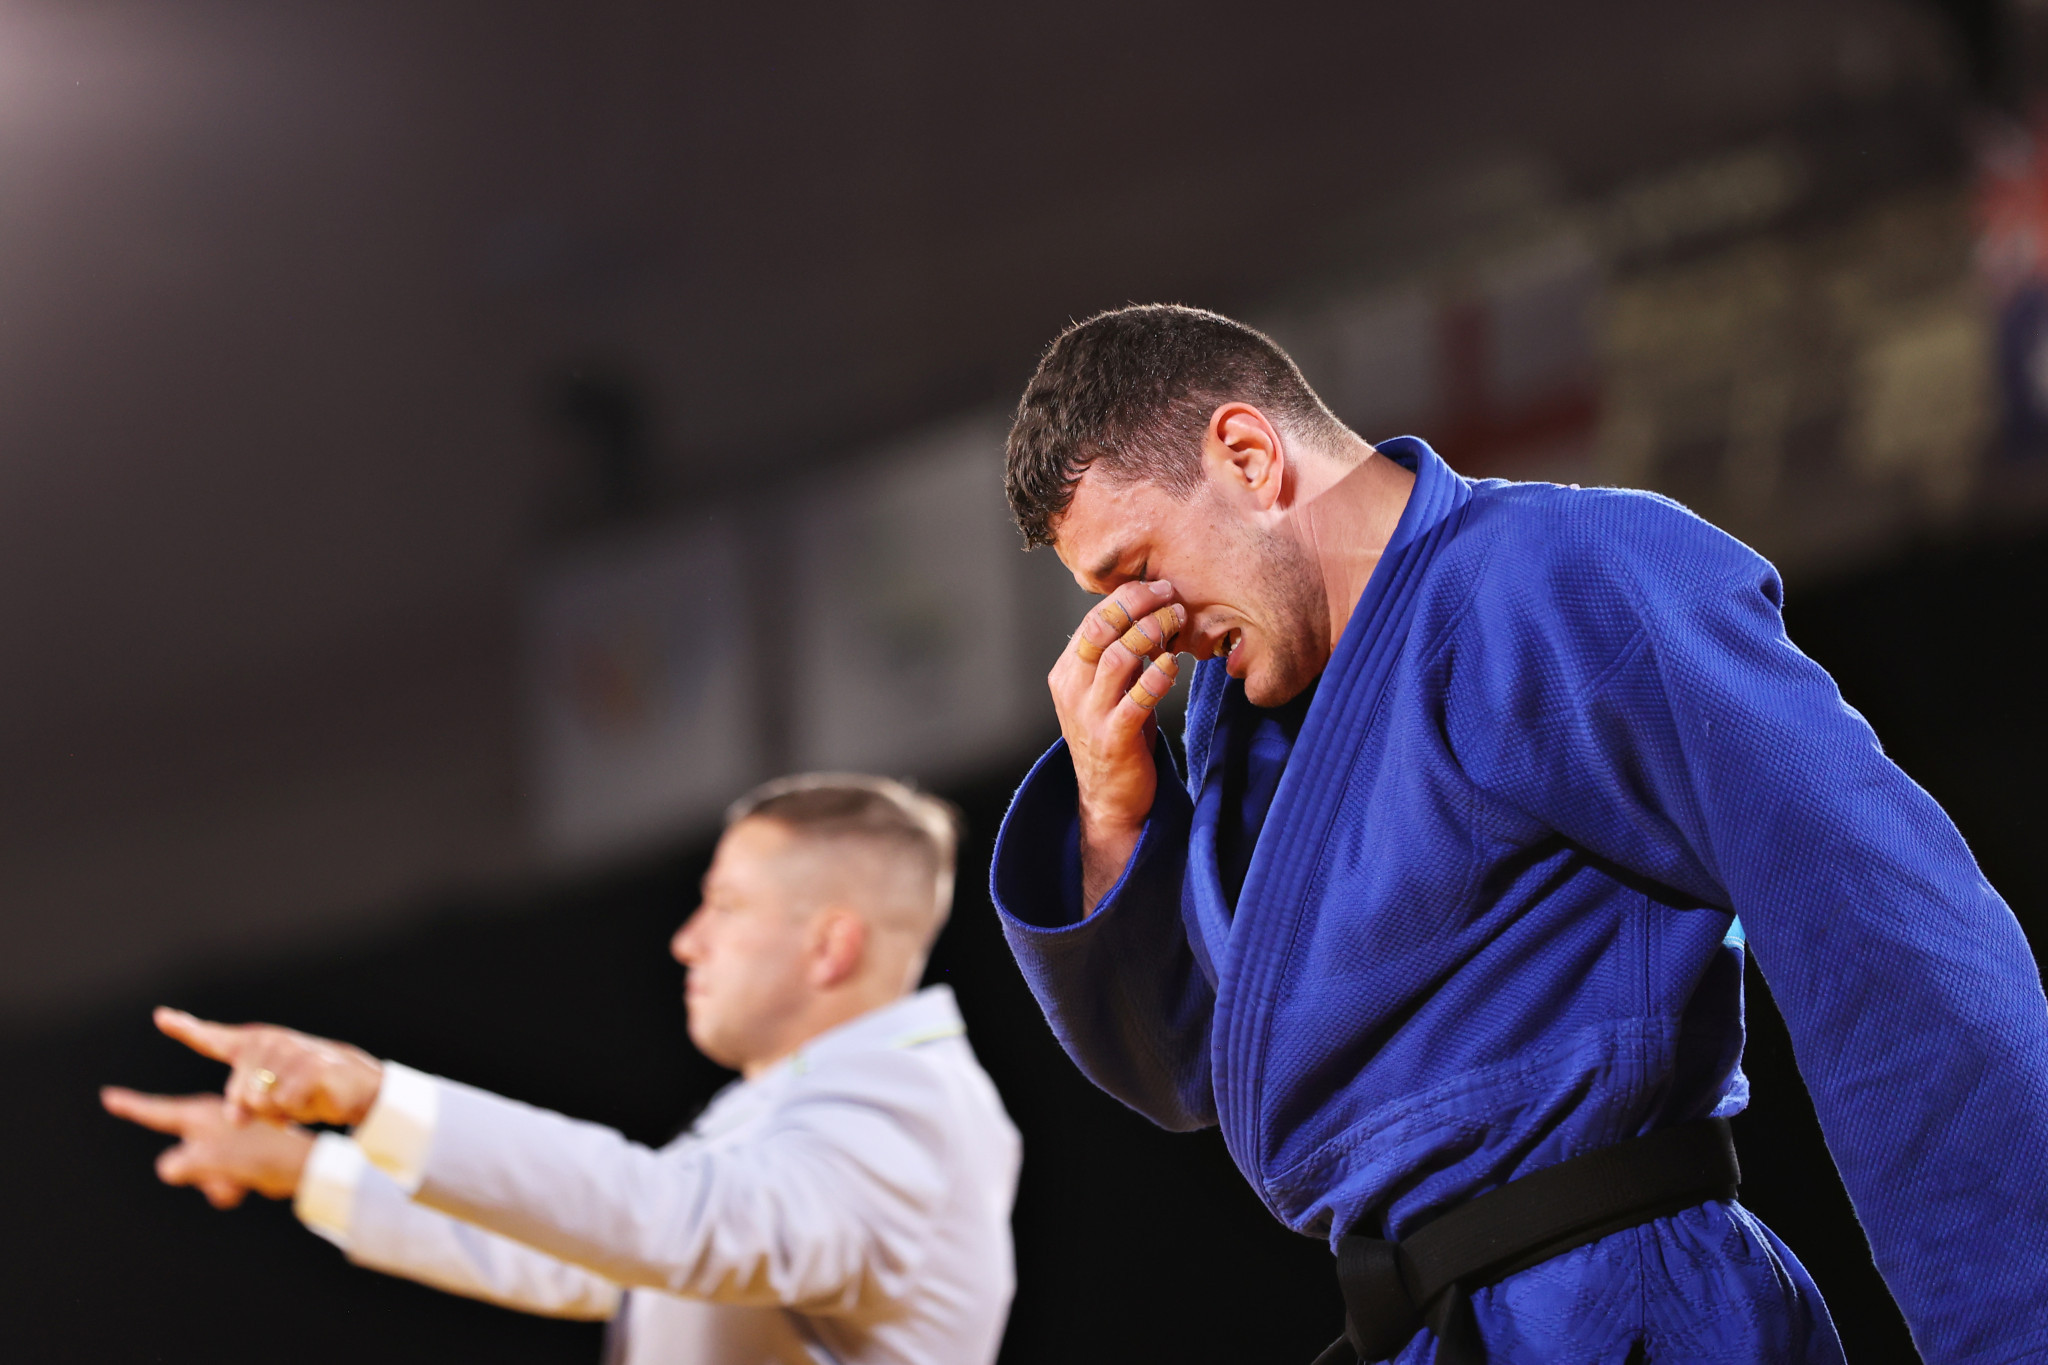 Eoin Fleming suffered a tear in his groin in the men's under-81kg bronze medal match in judo, heartbreakingly losing a chance of making the podium ©Getty Images 